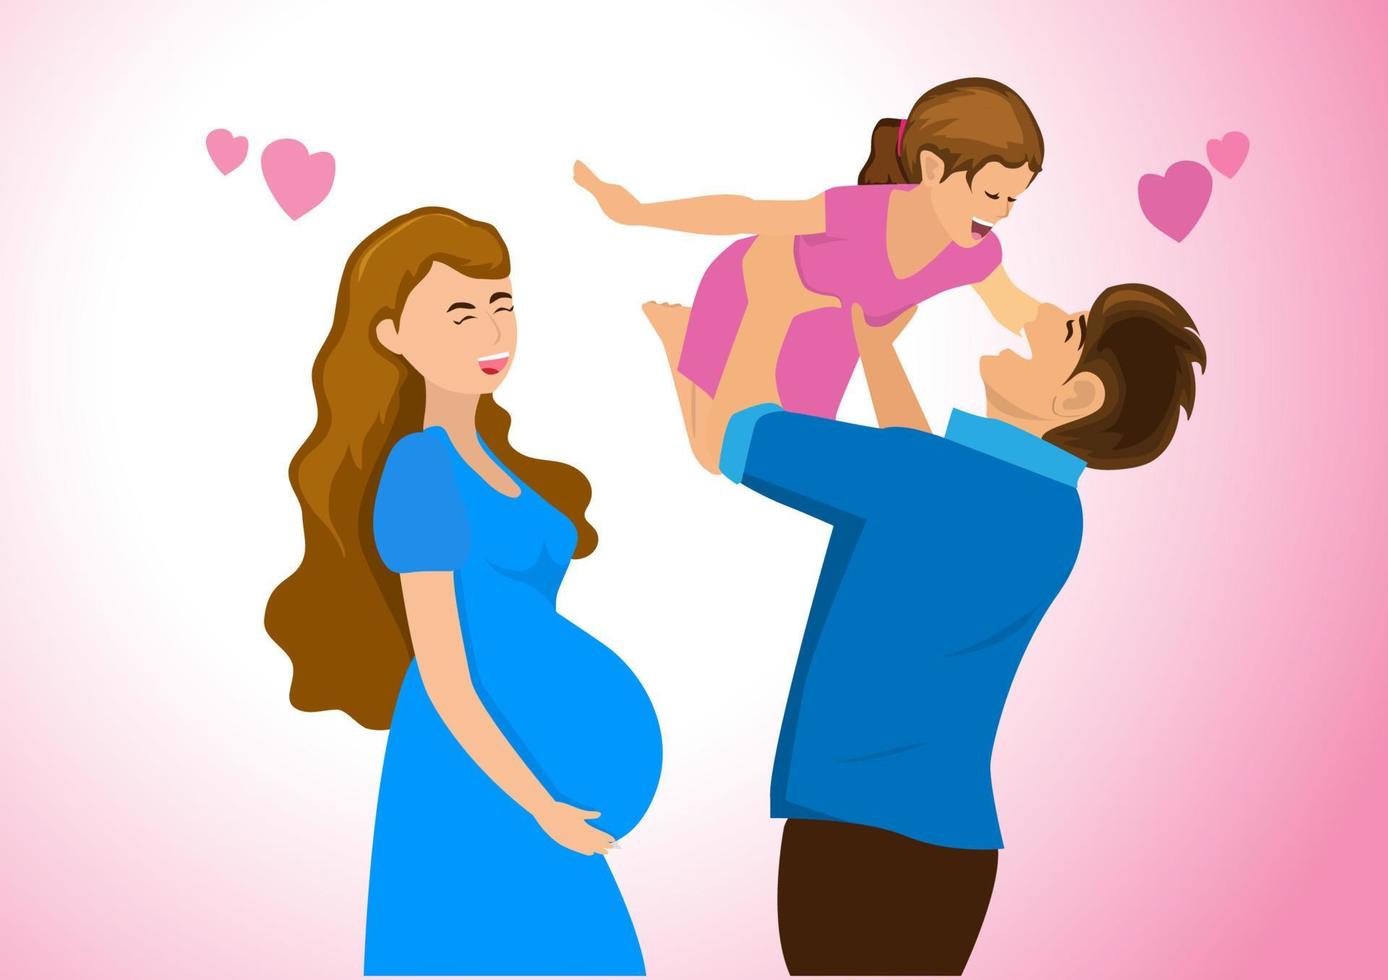 happy family at home father playing with daughter pregnant mother standing smiling happily safe. Flat style cartoon illustration vector